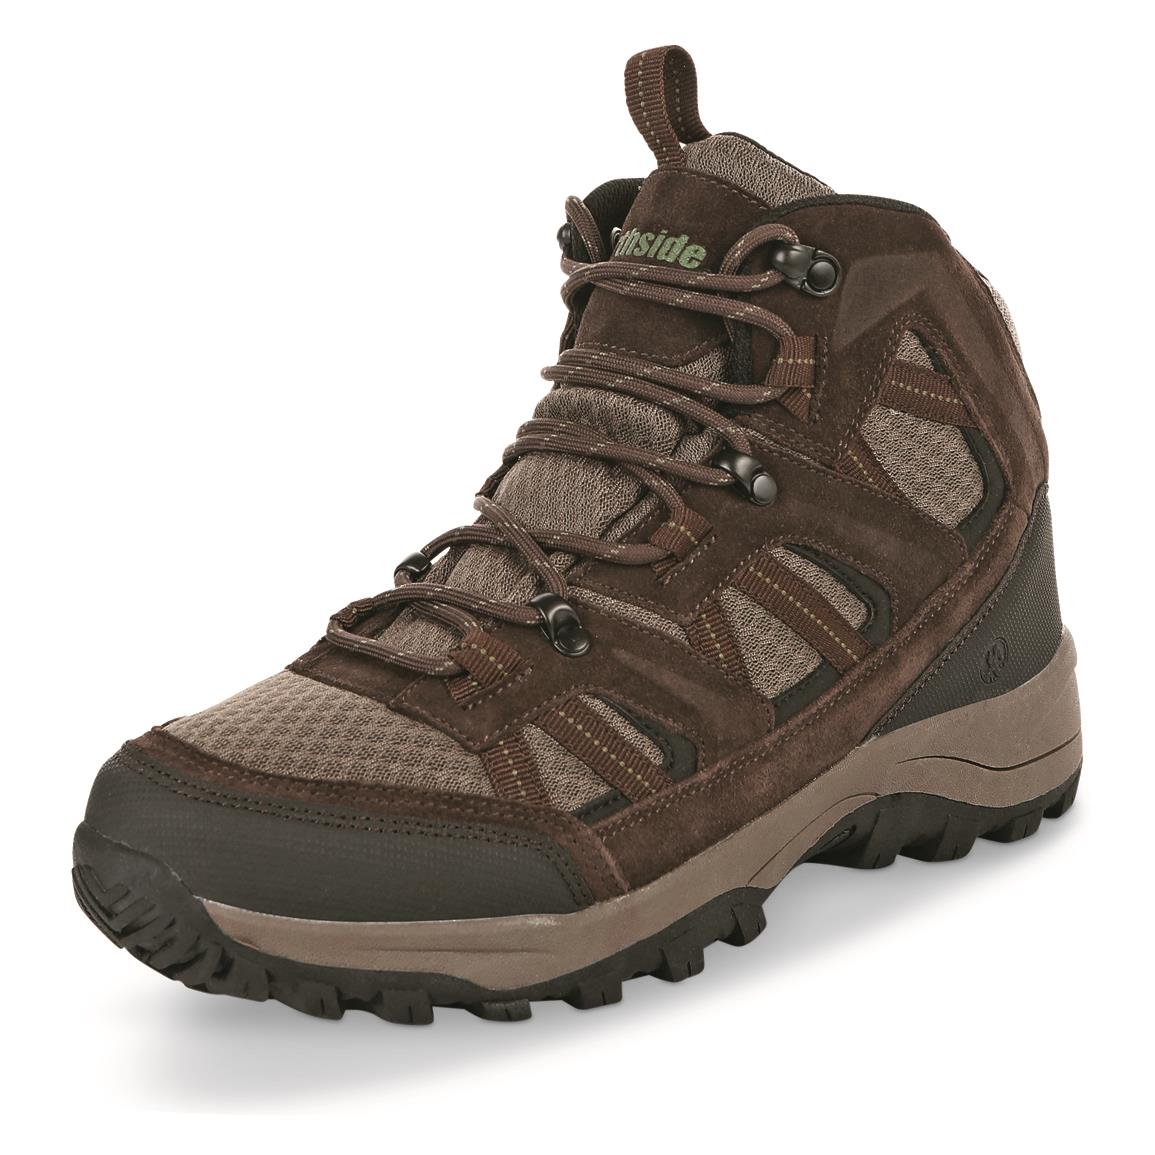 Northside Men's Arlow Canyon Mid Hiking Boots, Planets